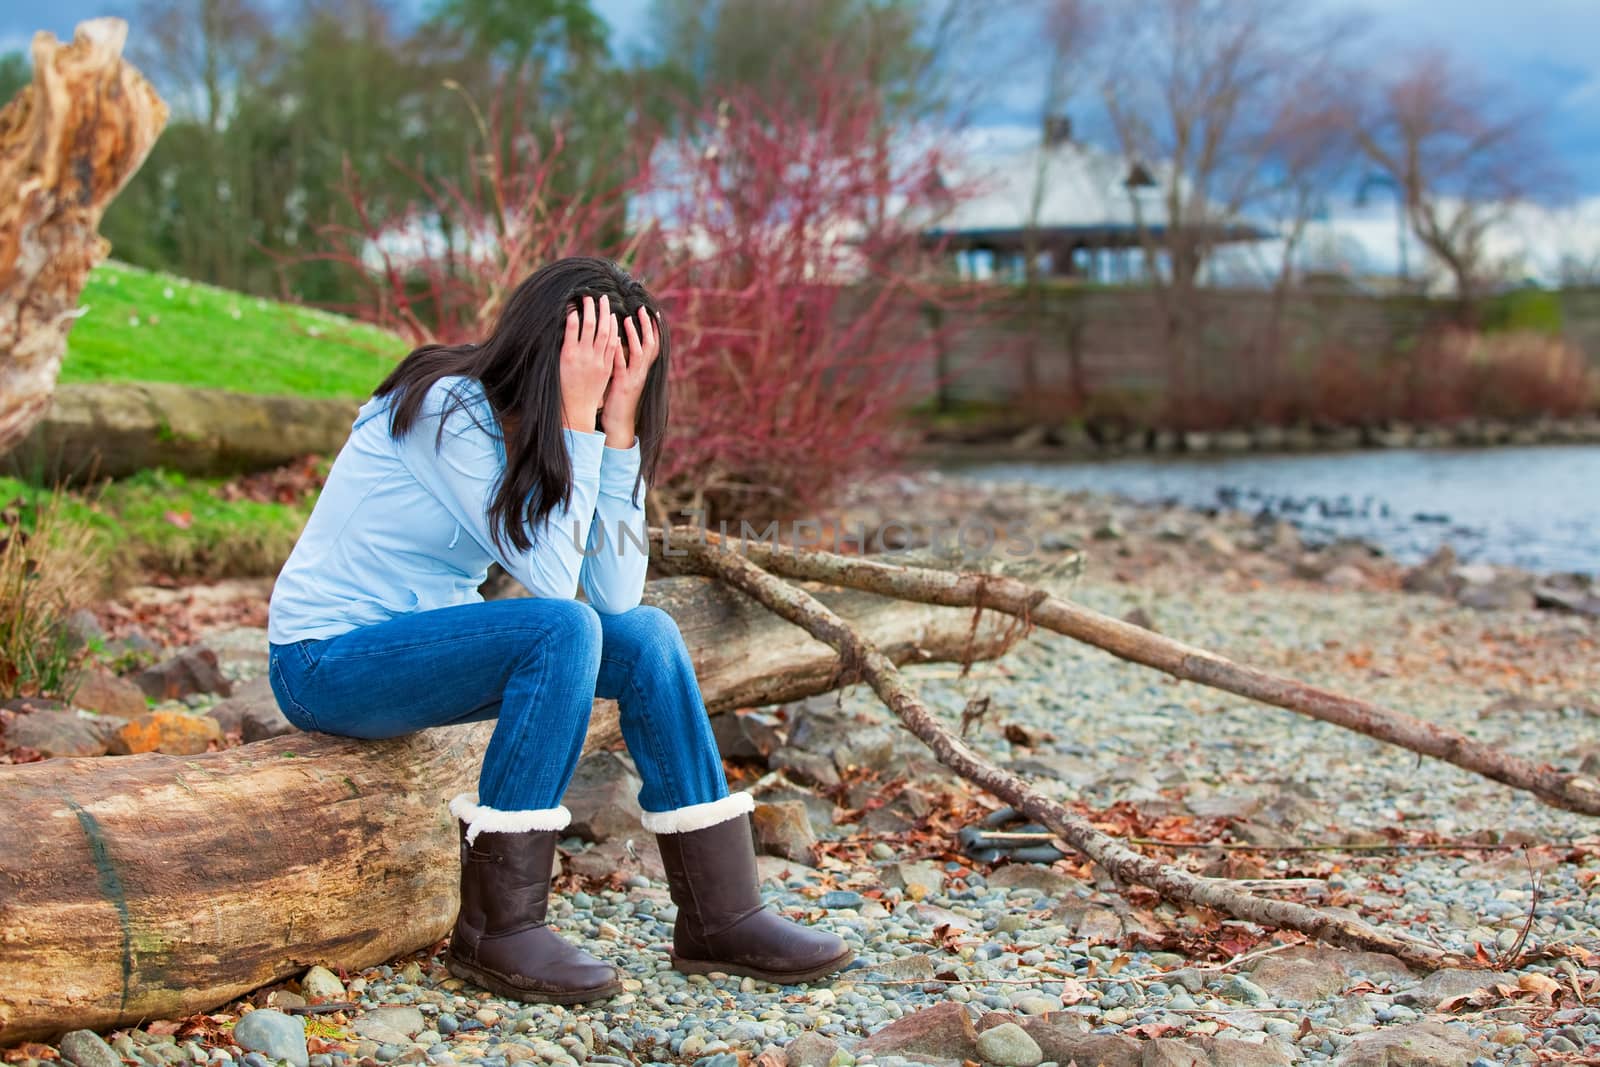 Sad young biracial teen girl in blue shirt and jeans sitting on log along rocky beach by lake